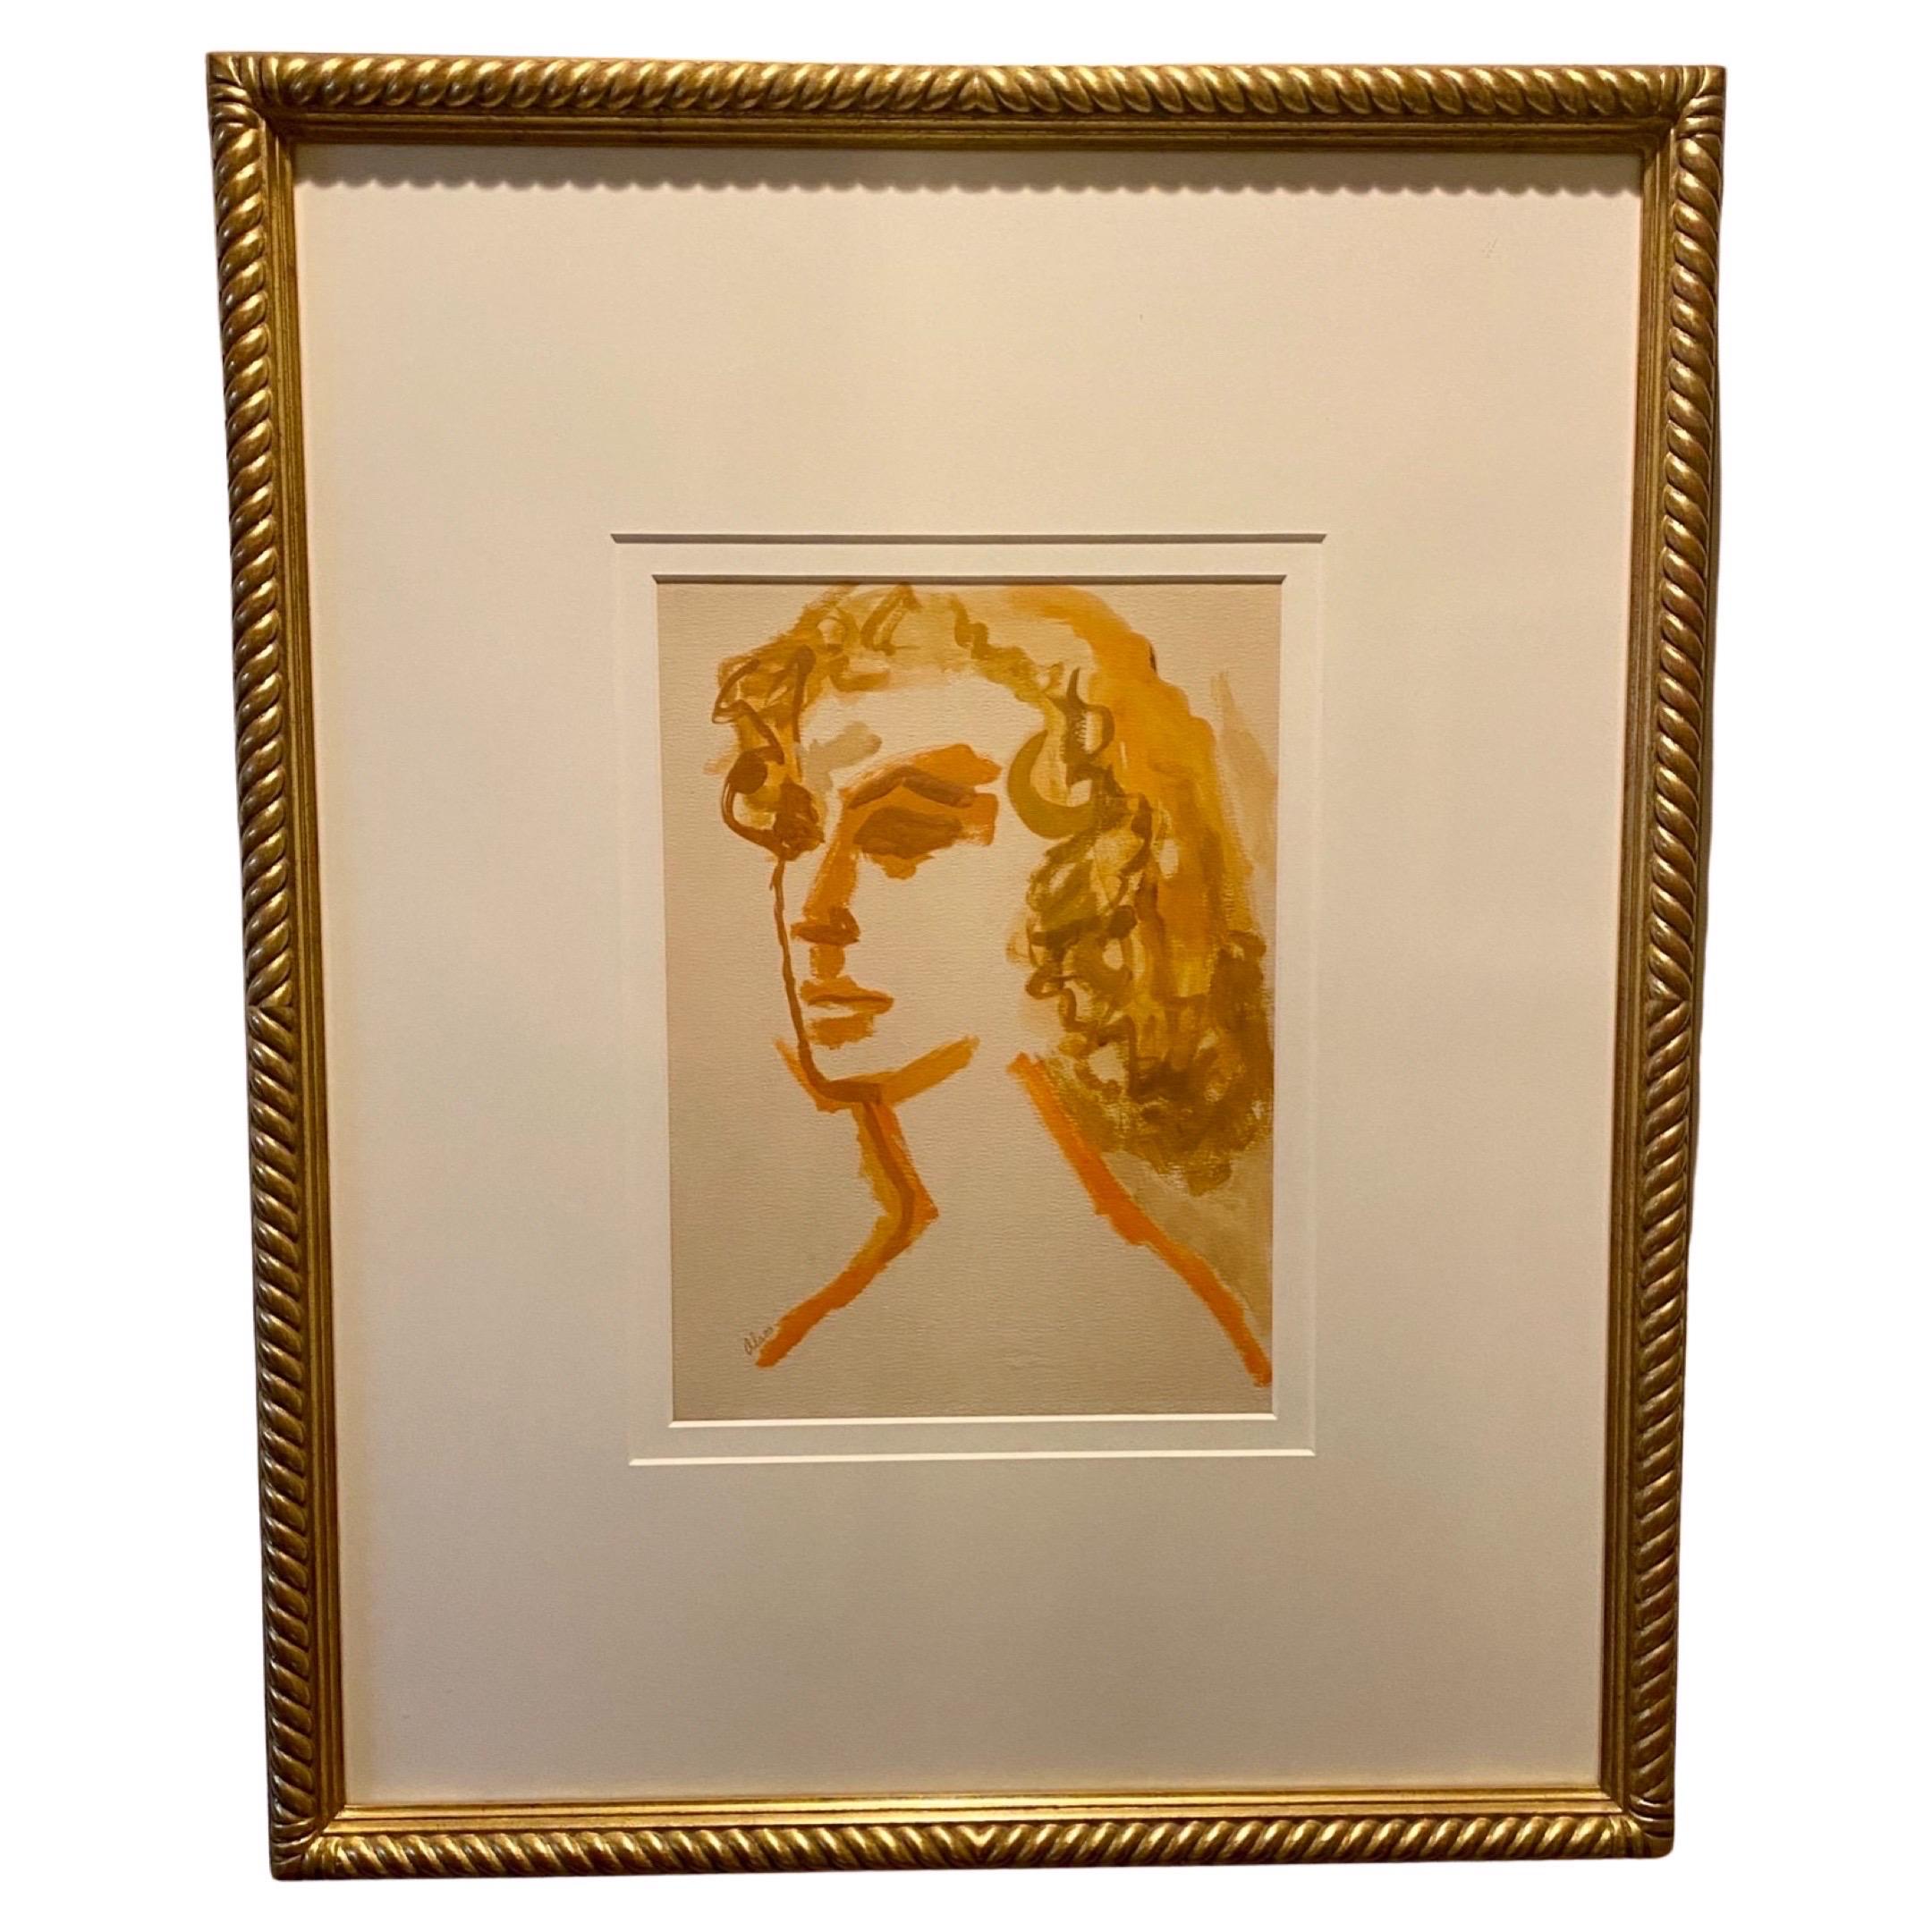 We had to have this beautiful painting when we went to a very high-end estate sale in Palm Desert California. Prominently displayed above the fireplace. We know nothing about the artist, although it is indeed an original painting and lovely portrait